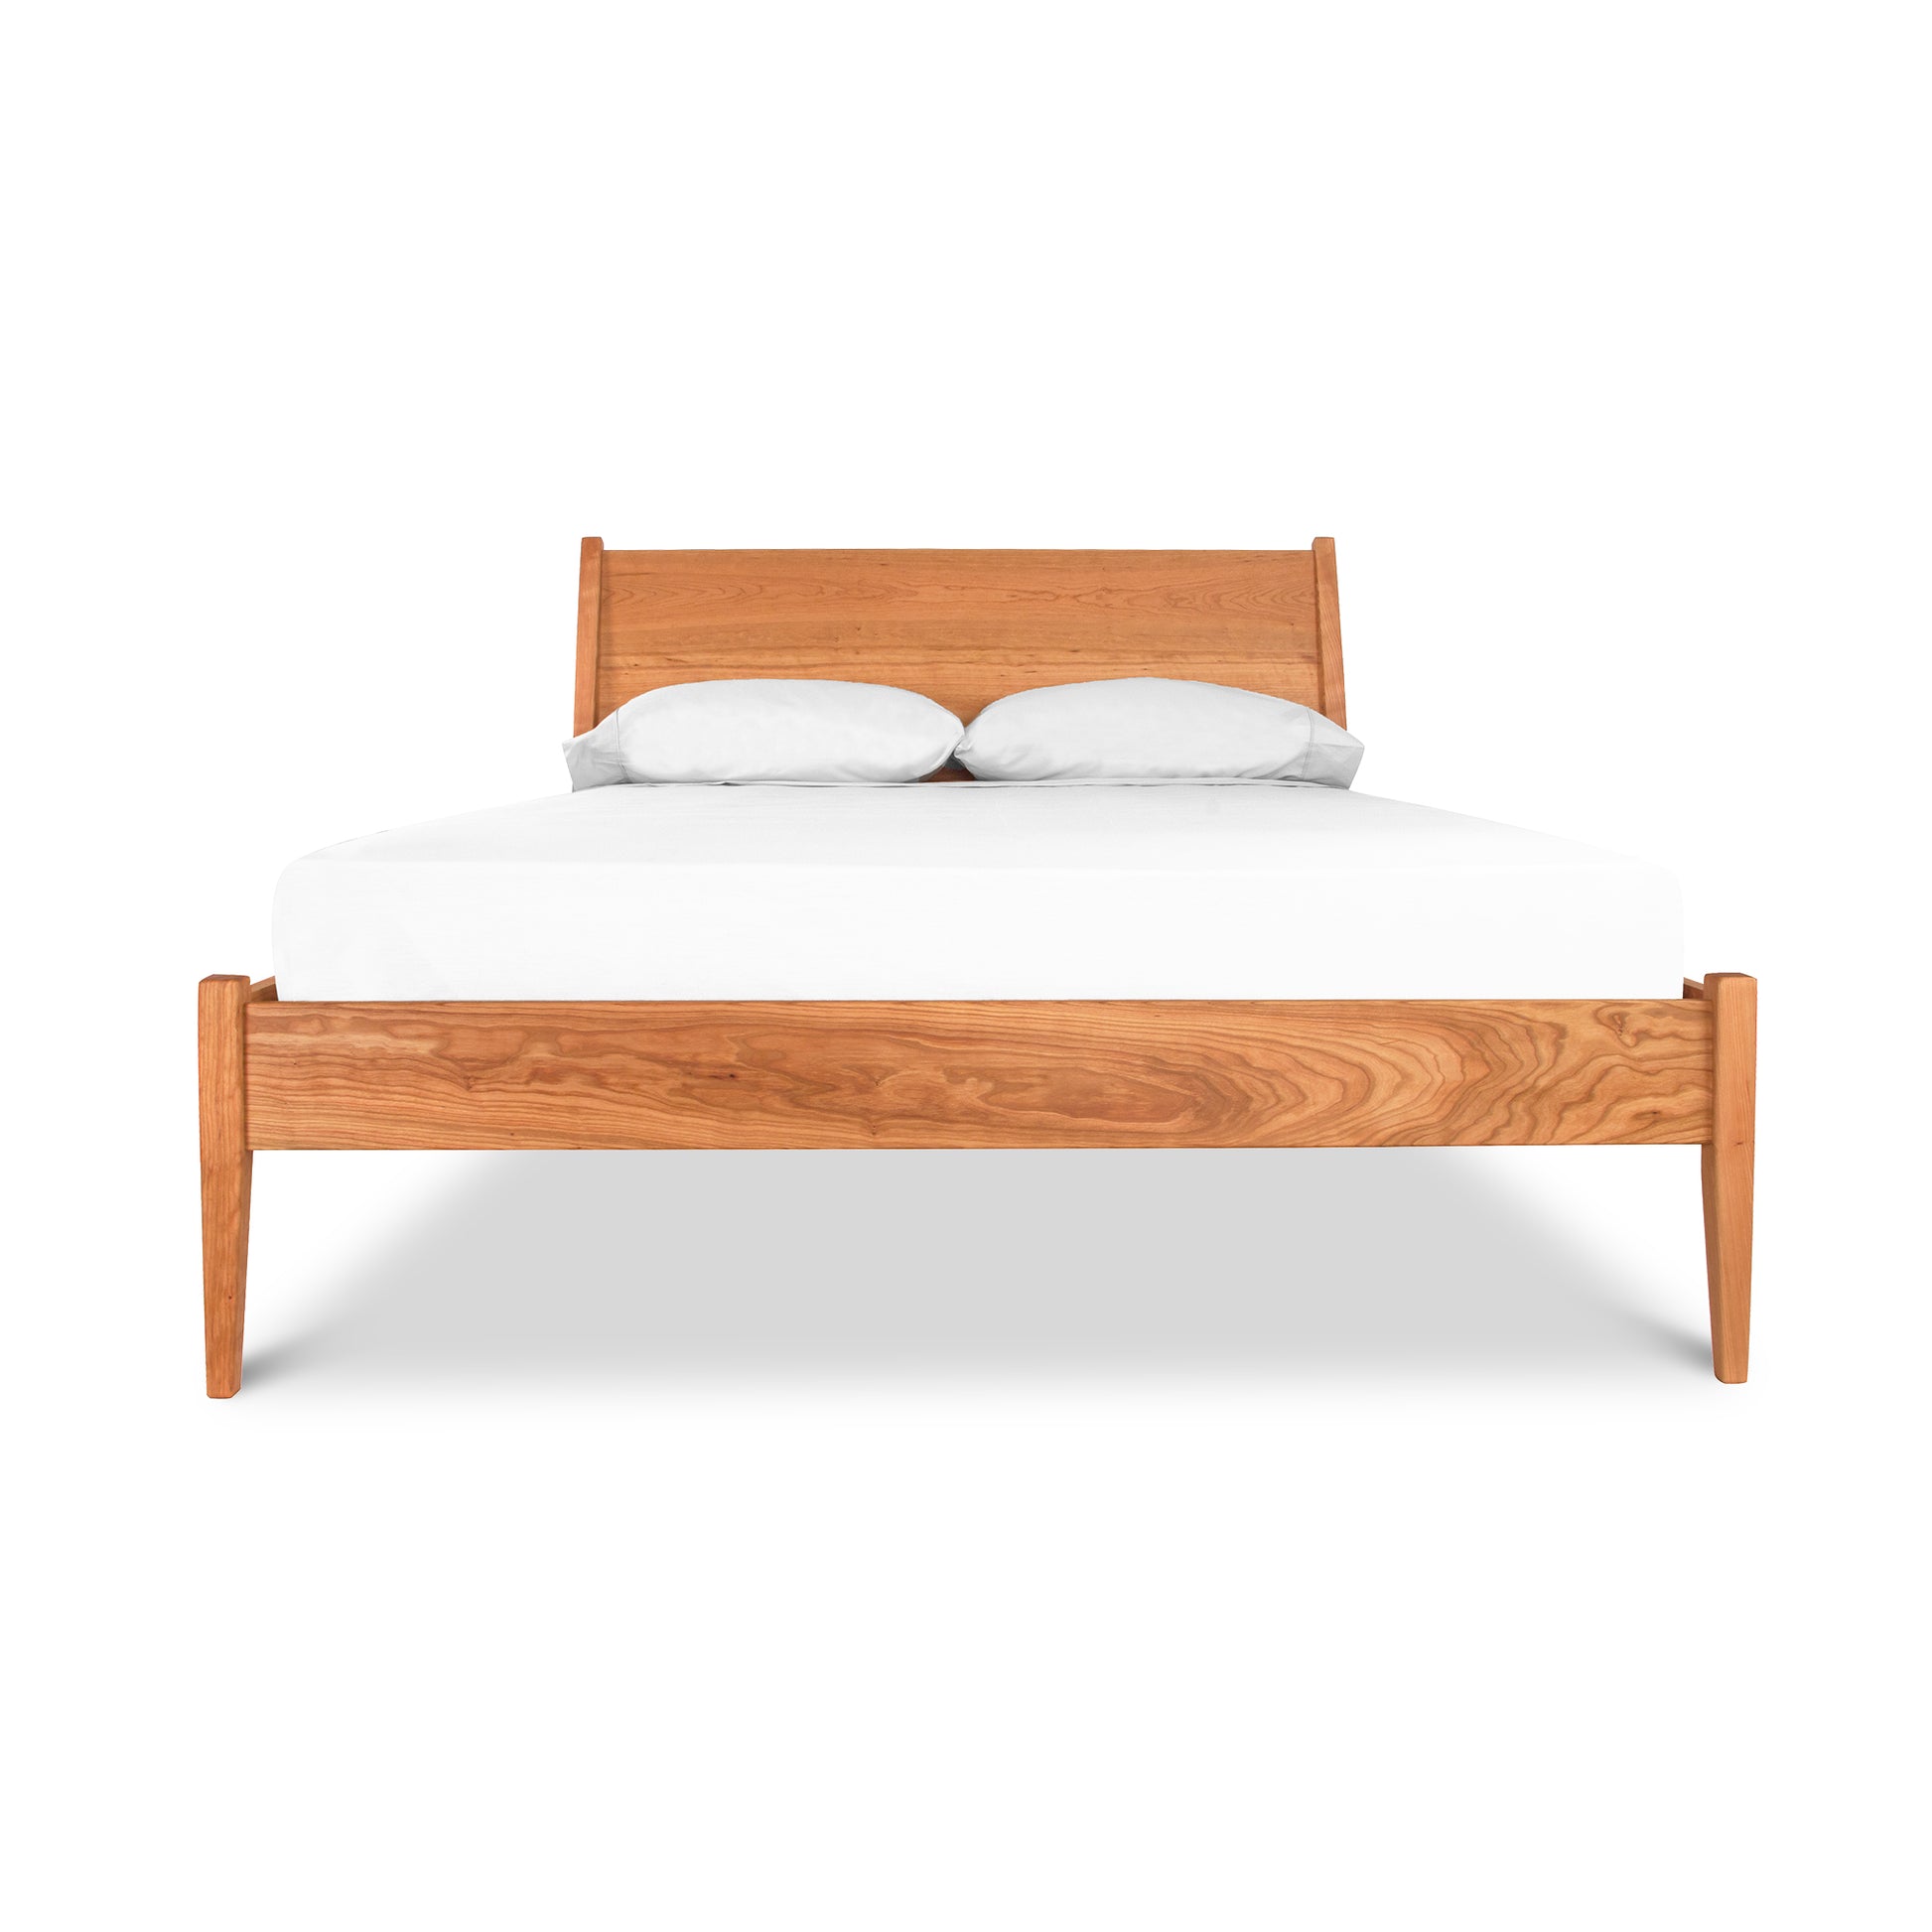 A simple Andover Modern Incline Bed frame with a white mattress and two pillows against a white background.